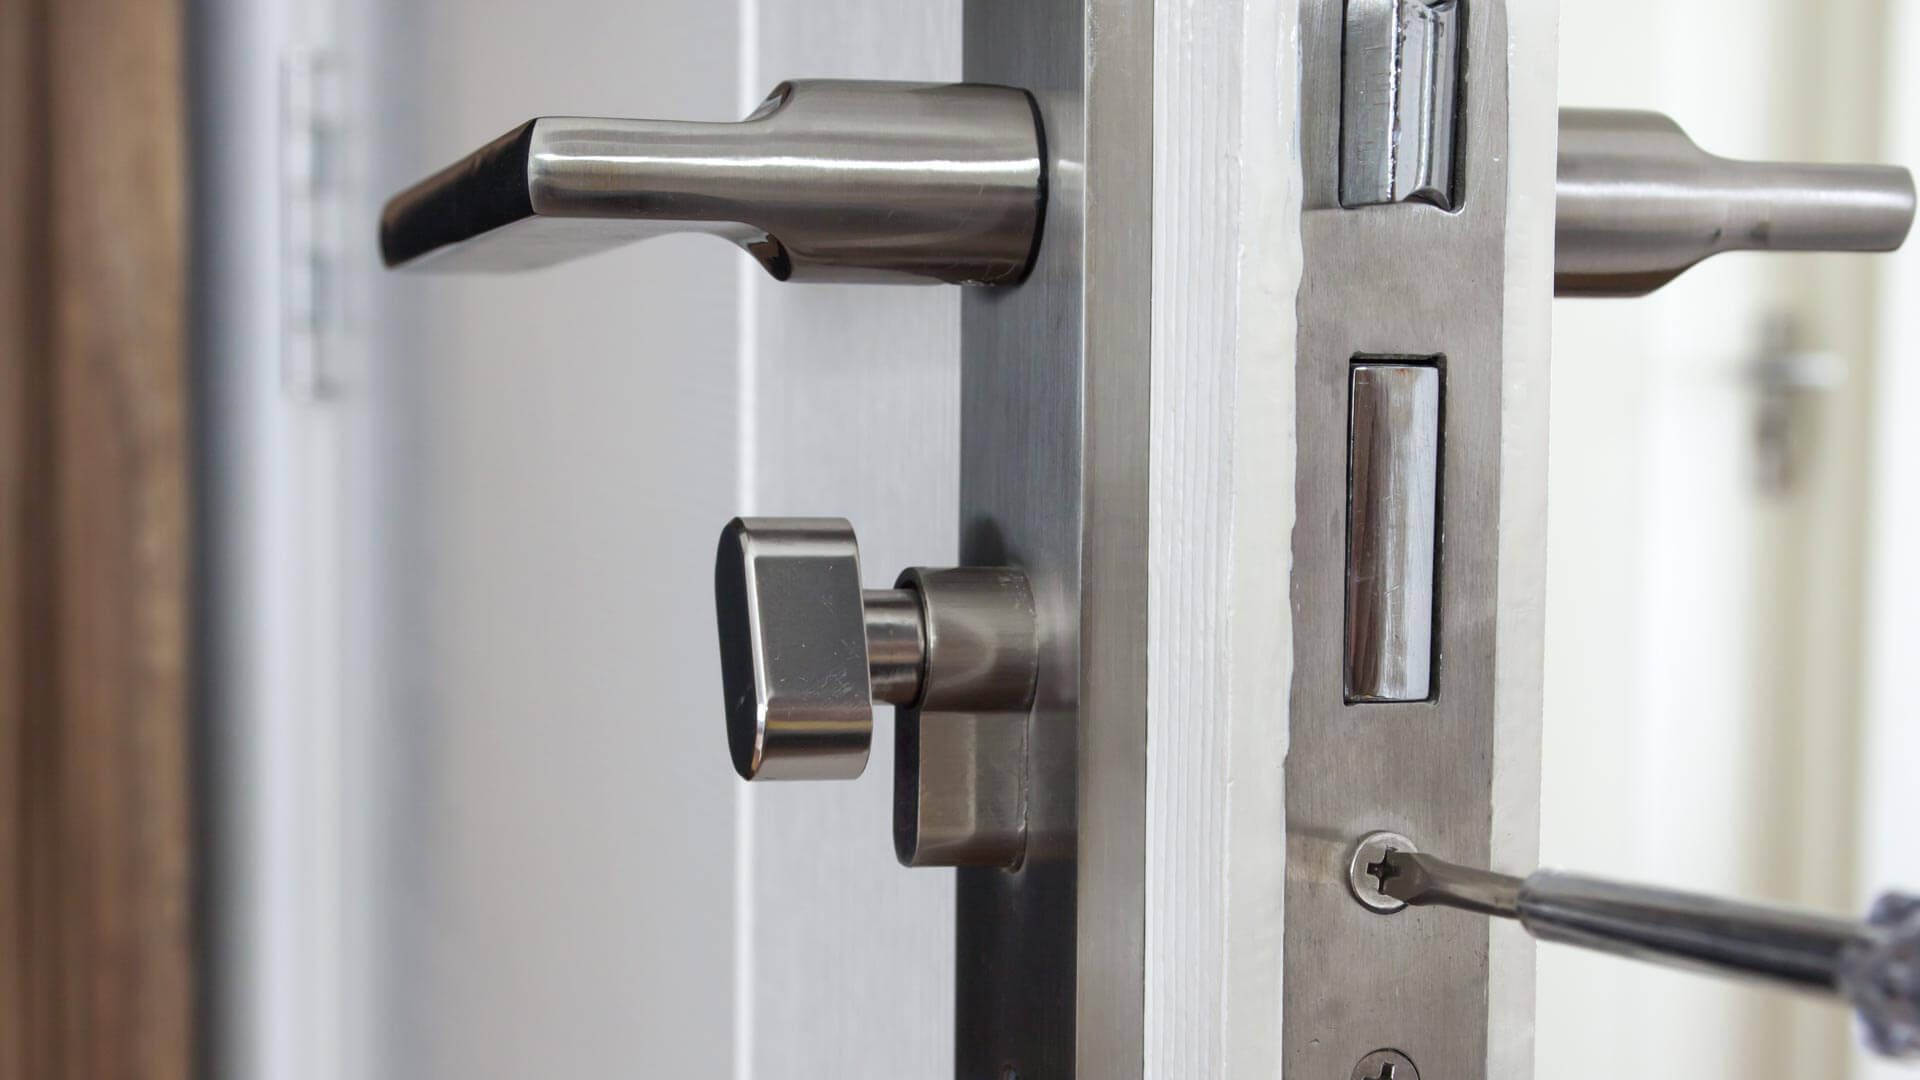 Commercial door lock installation at a property in Pinellas Park, FL.